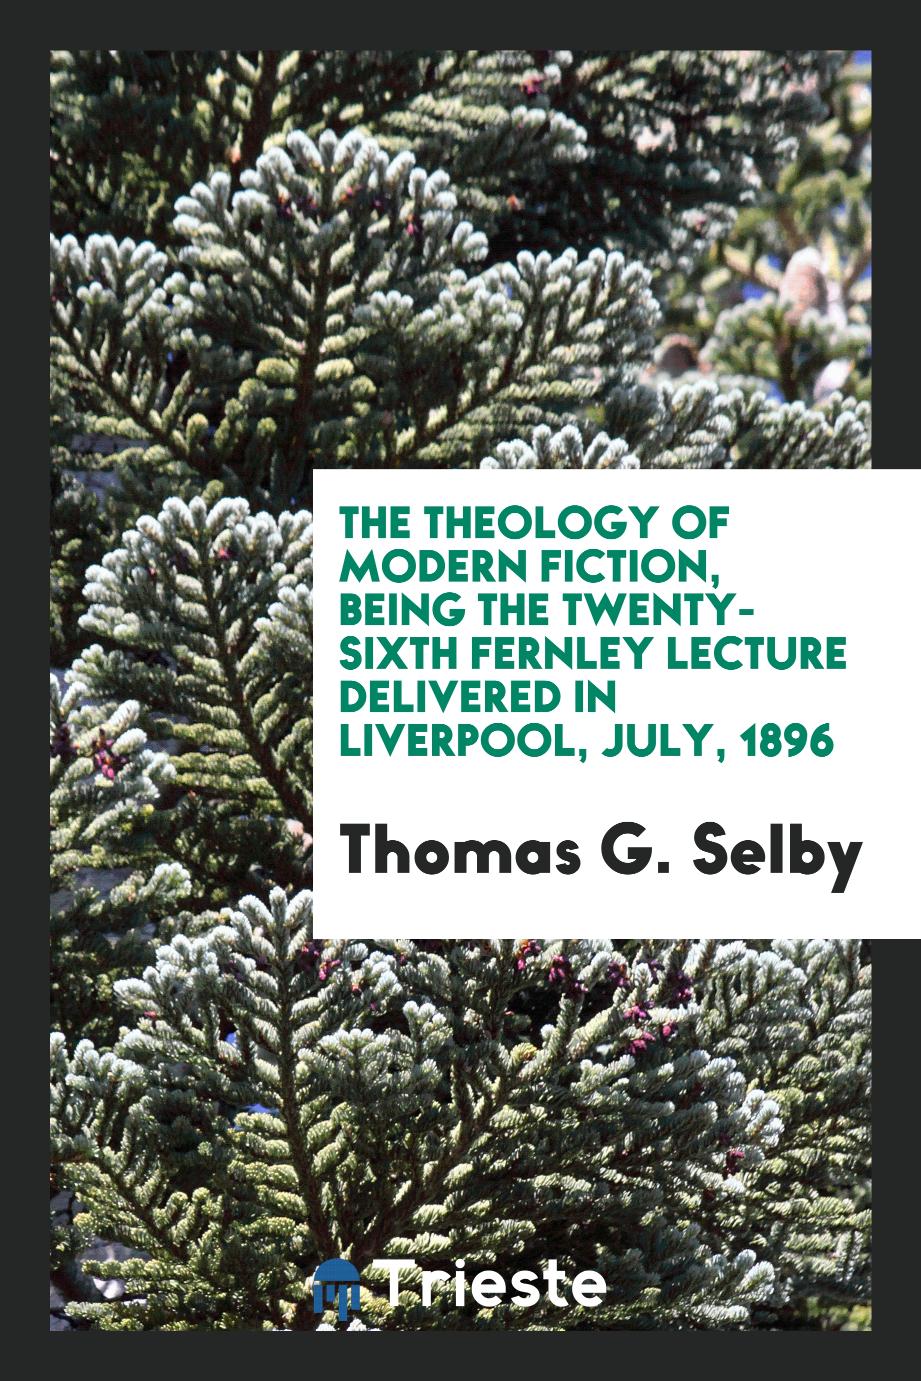 The theology of modern fiction, being the twenty-sixth Fernley lecture delivered in Liverpool, July, 1896